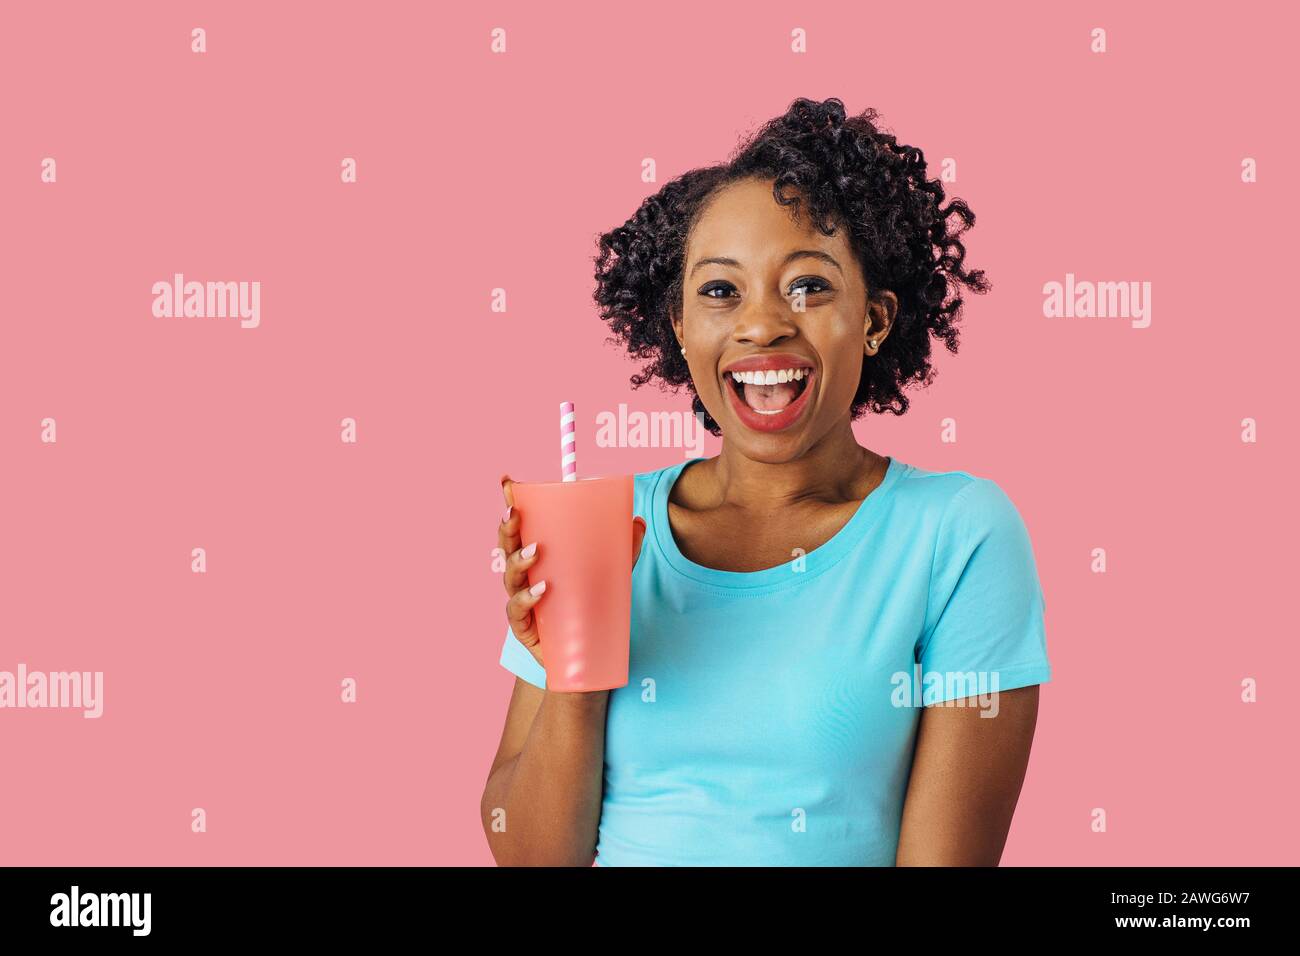 https://c8.alamy.com/comp/2AWG6W7/close-up-portrait-of-an-excited-young-smiling-woman-holding-a-drinking-cup-with-straw-and-looking-at-camera-with-mouth-open-2AWG6W7.jpg